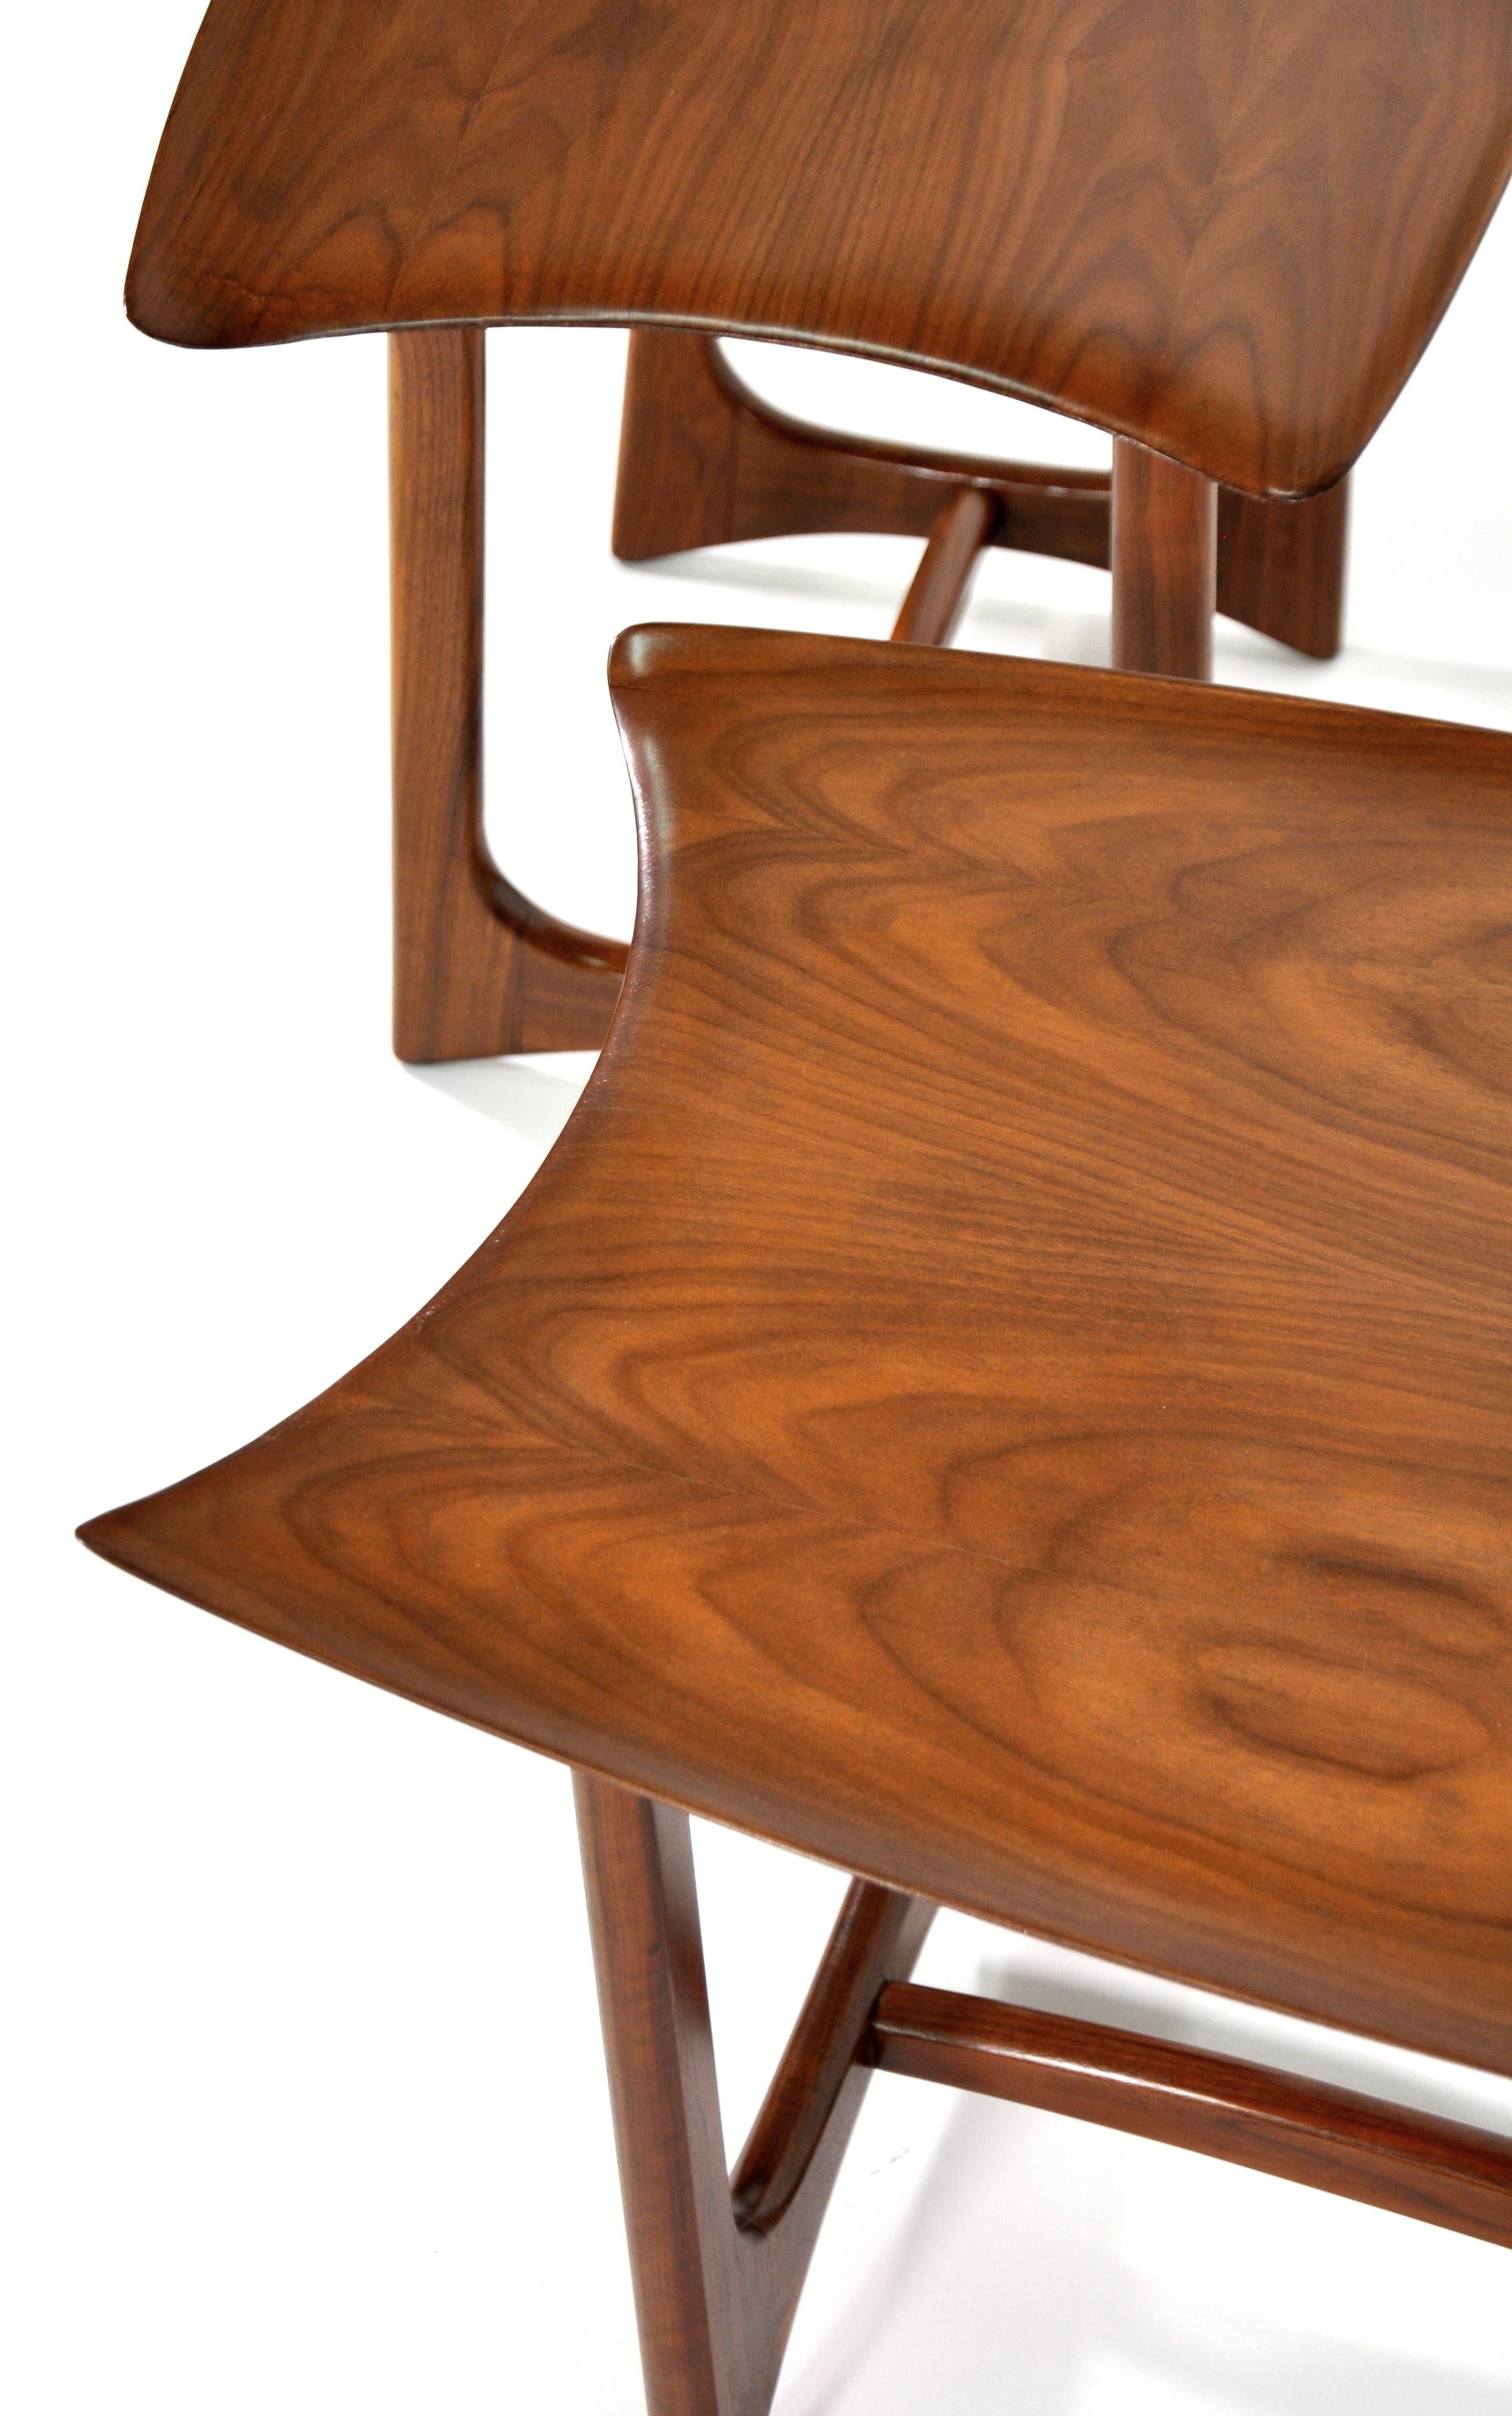 Stunning and exceedingly rare pair of sculptural walnut end or side tables, designed by the legendary Adrian Pearsall for Craft Associates in the 1950s. The vintage occasional tables feature a striking and unique design with organic form. These